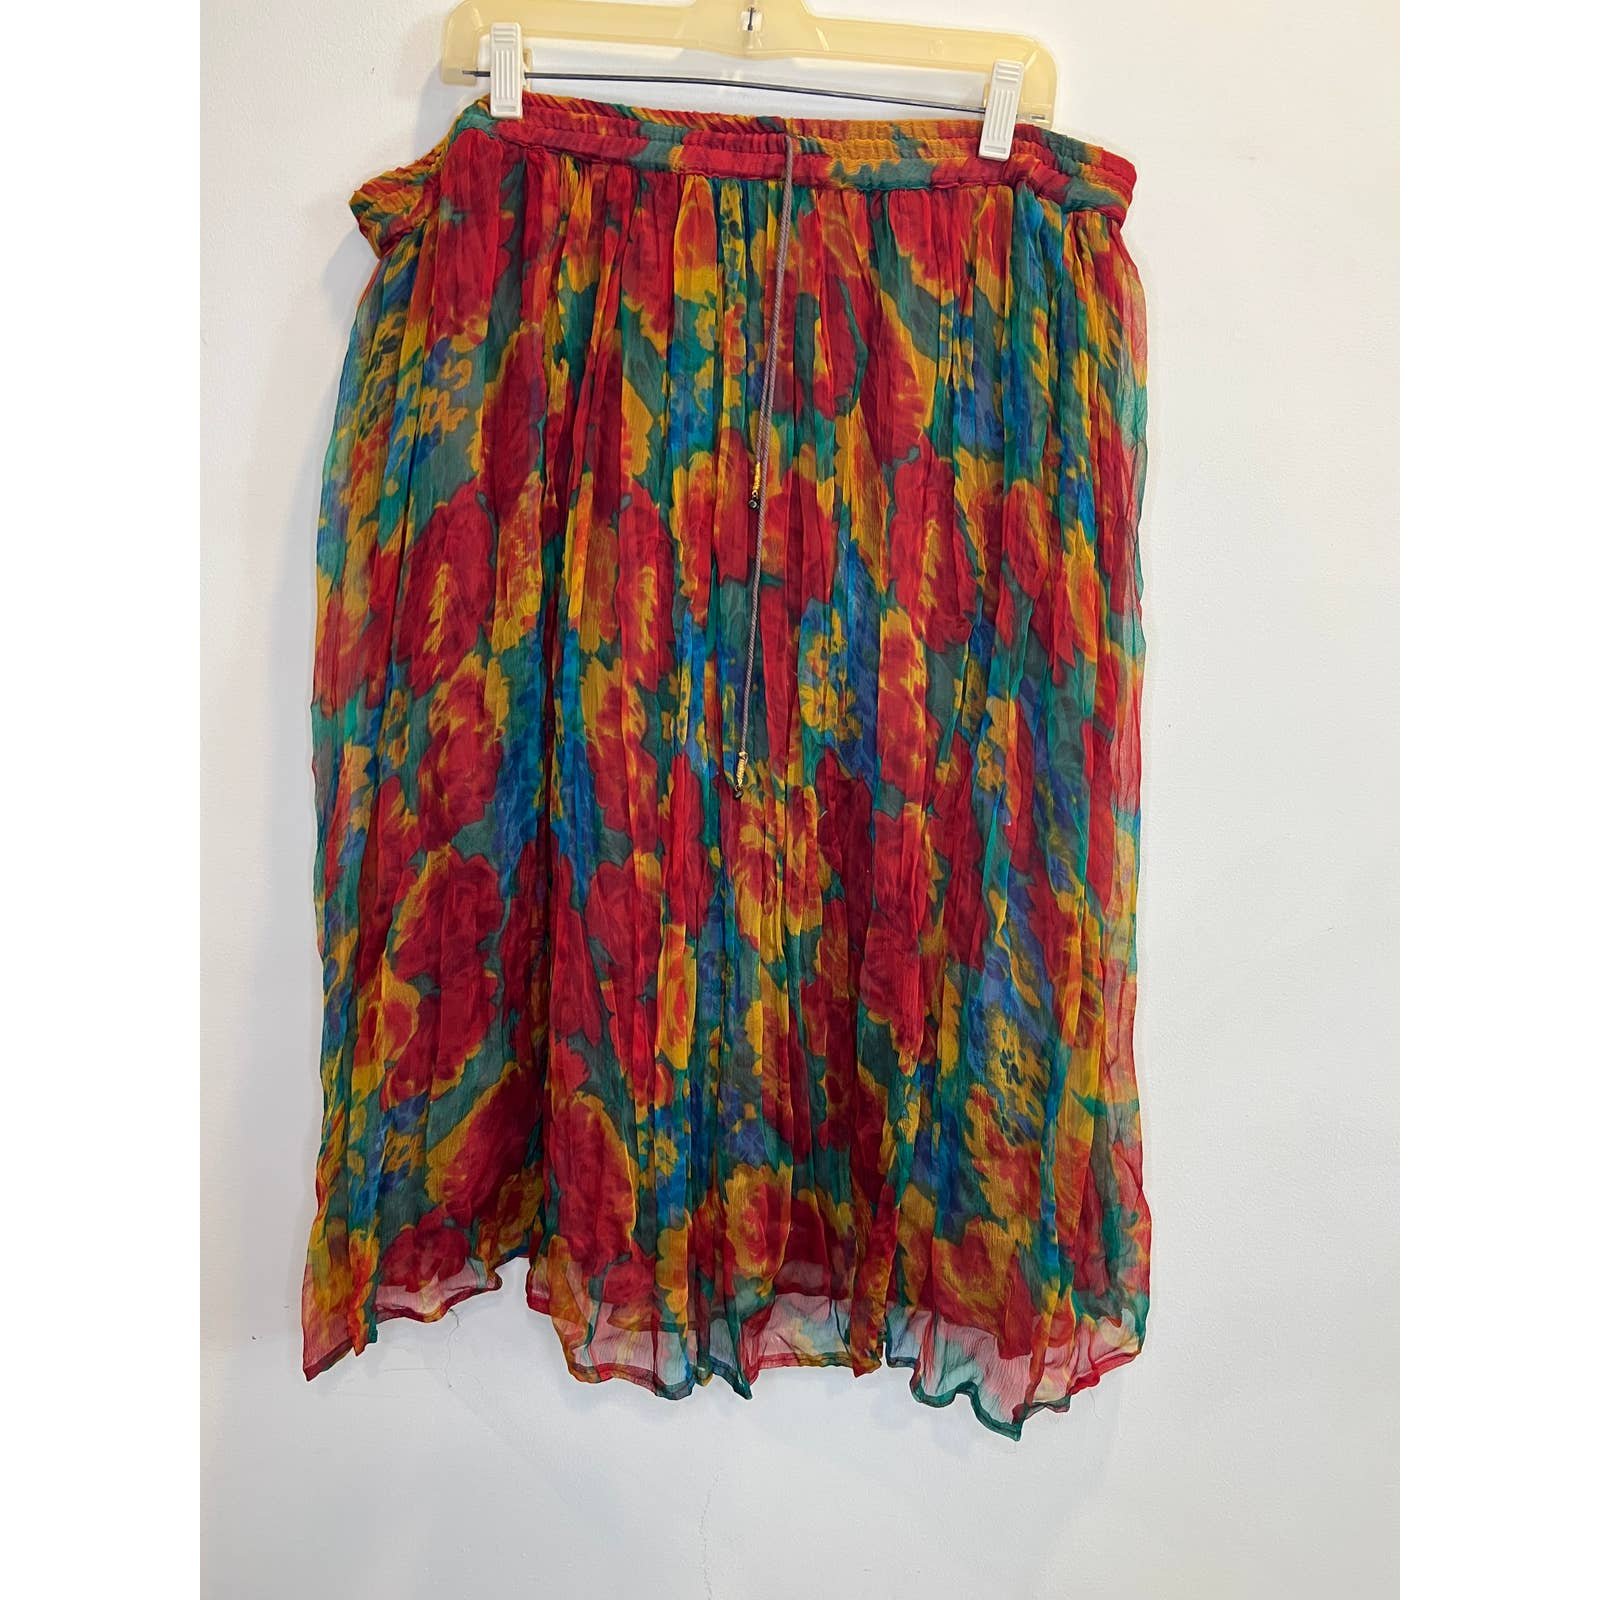 Latest  Vintage Mustard, Red and Teal Gauzey Pleated Skirt  - Size XL-XXL Jf8a271Mj just for you